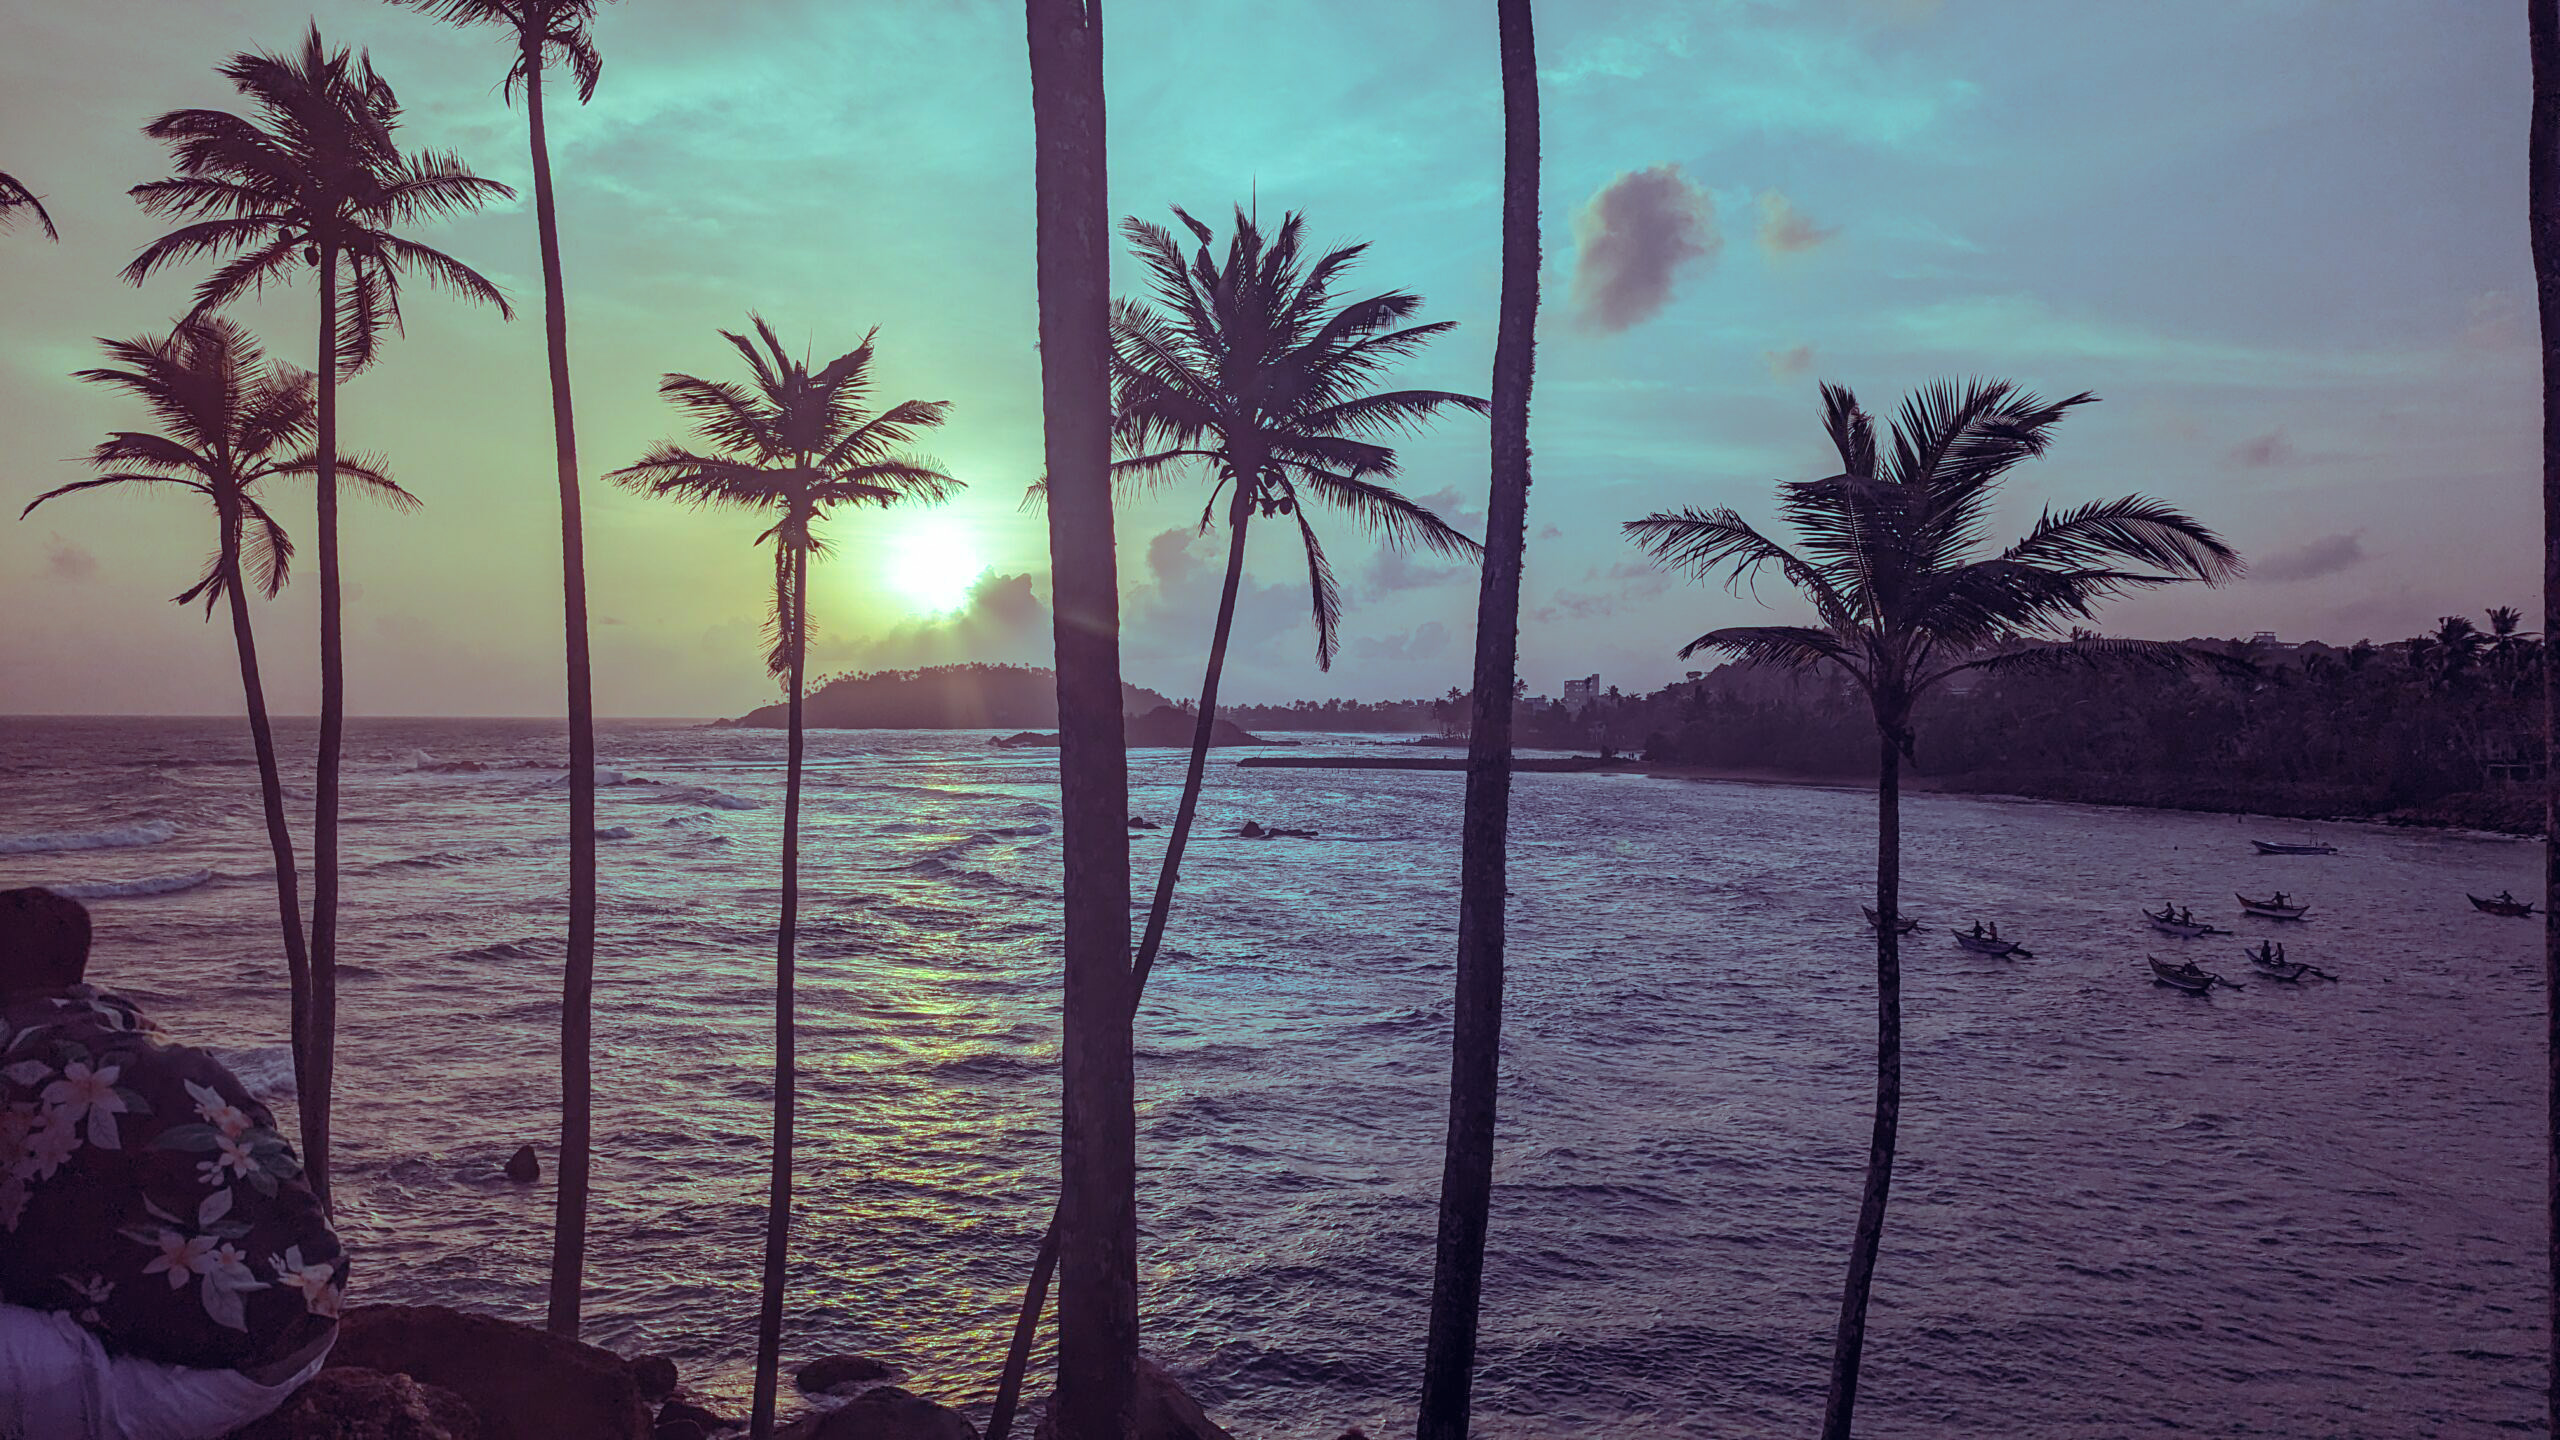 Photograph of a sunset in Weligama with a color filter